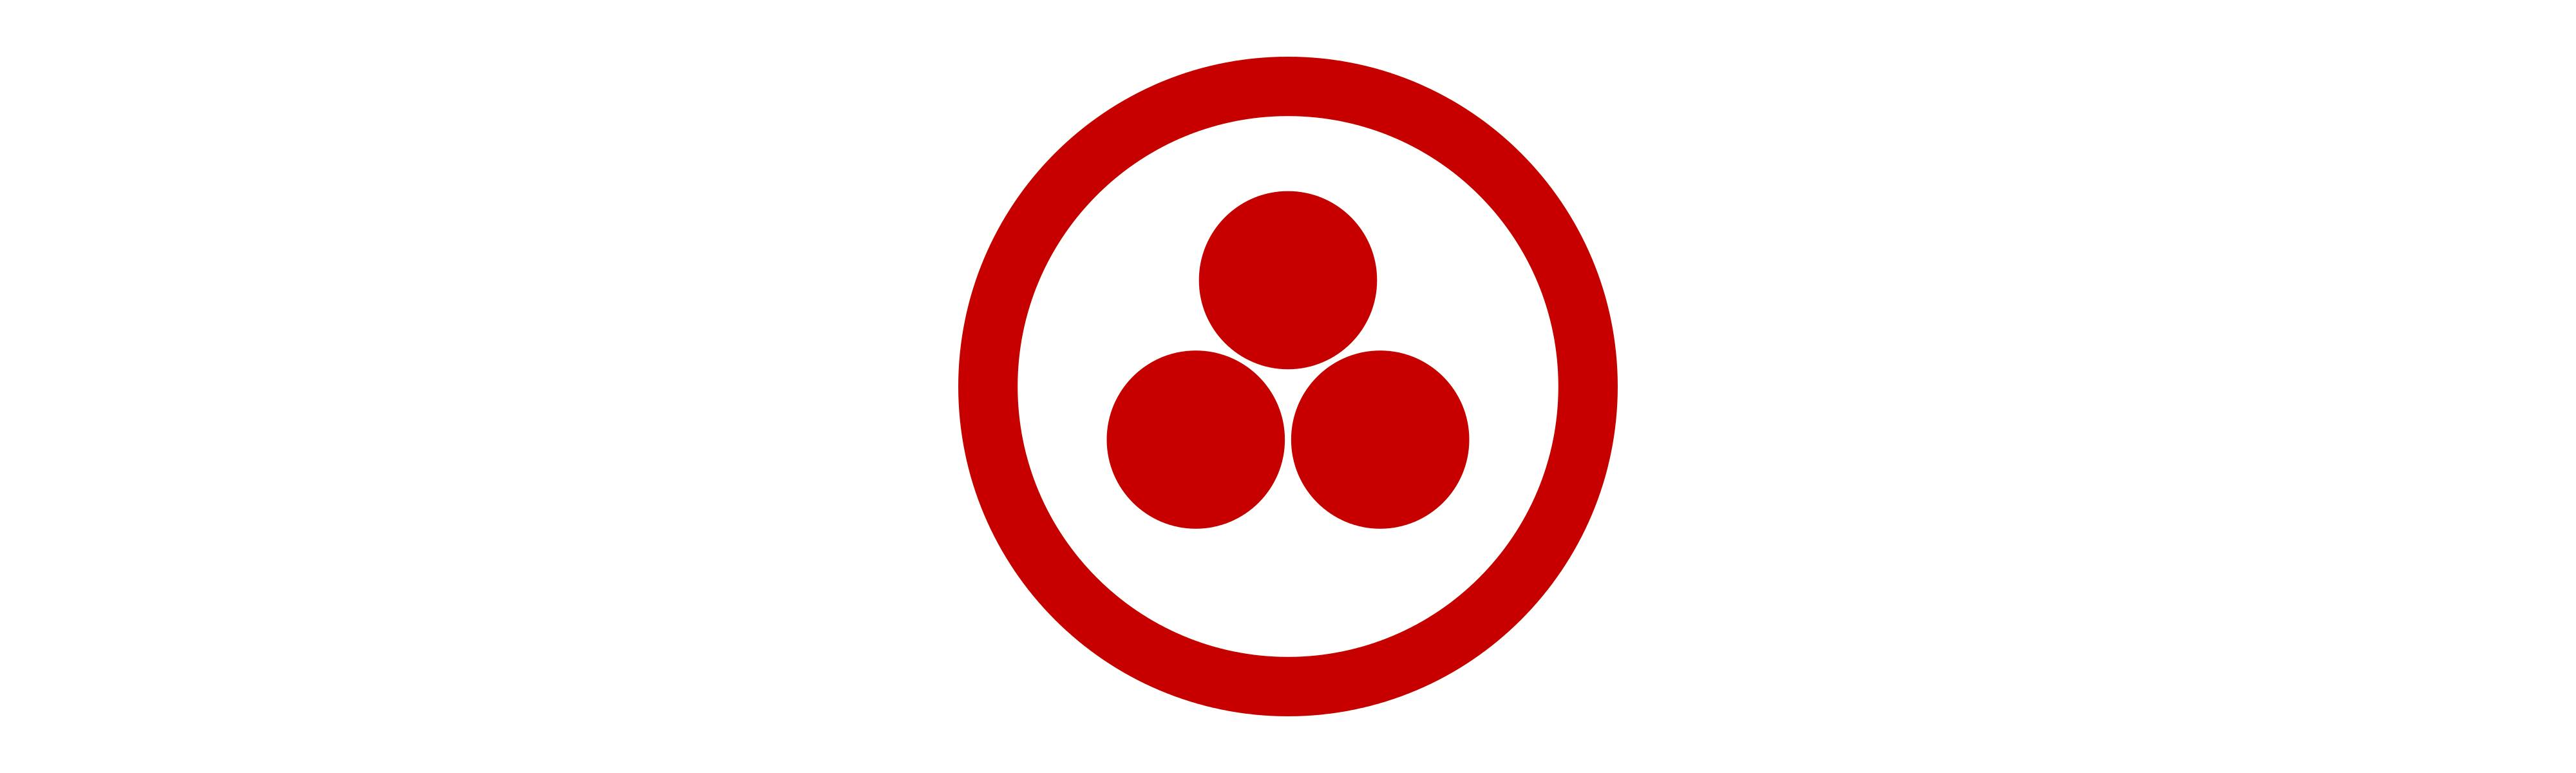 Banner of Peace symbol designed by Nikolai Konstantinovič Rerich: three red balls on a white background surrounded by a circle of the same color.